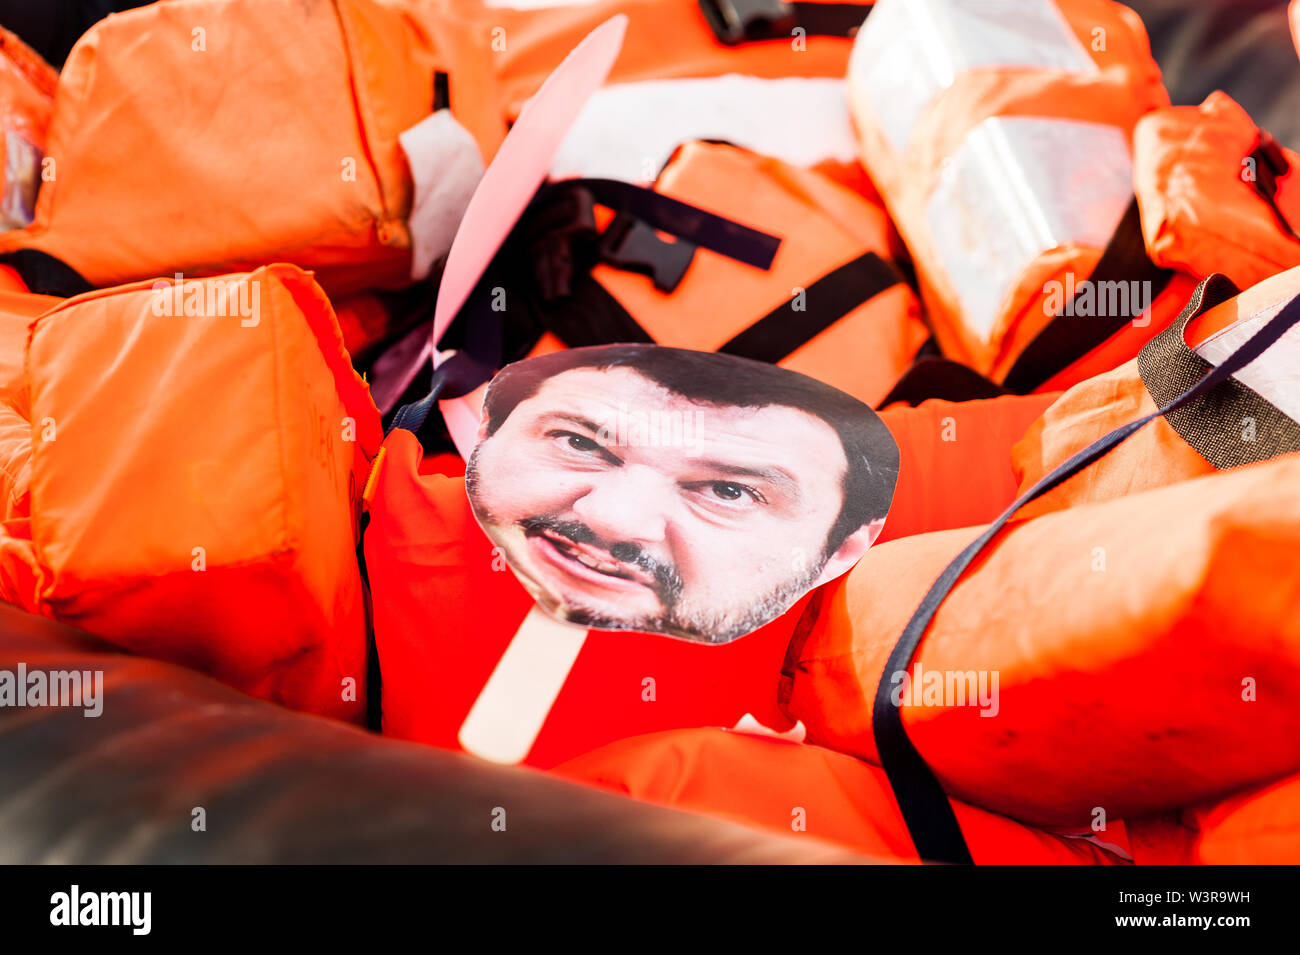 Barcelona, spain- 14 july 2019: mask of salvini face  drowning inside rubber dinghy with life belts and proactiva open arms stickers as a symbol of mi Stock Photo